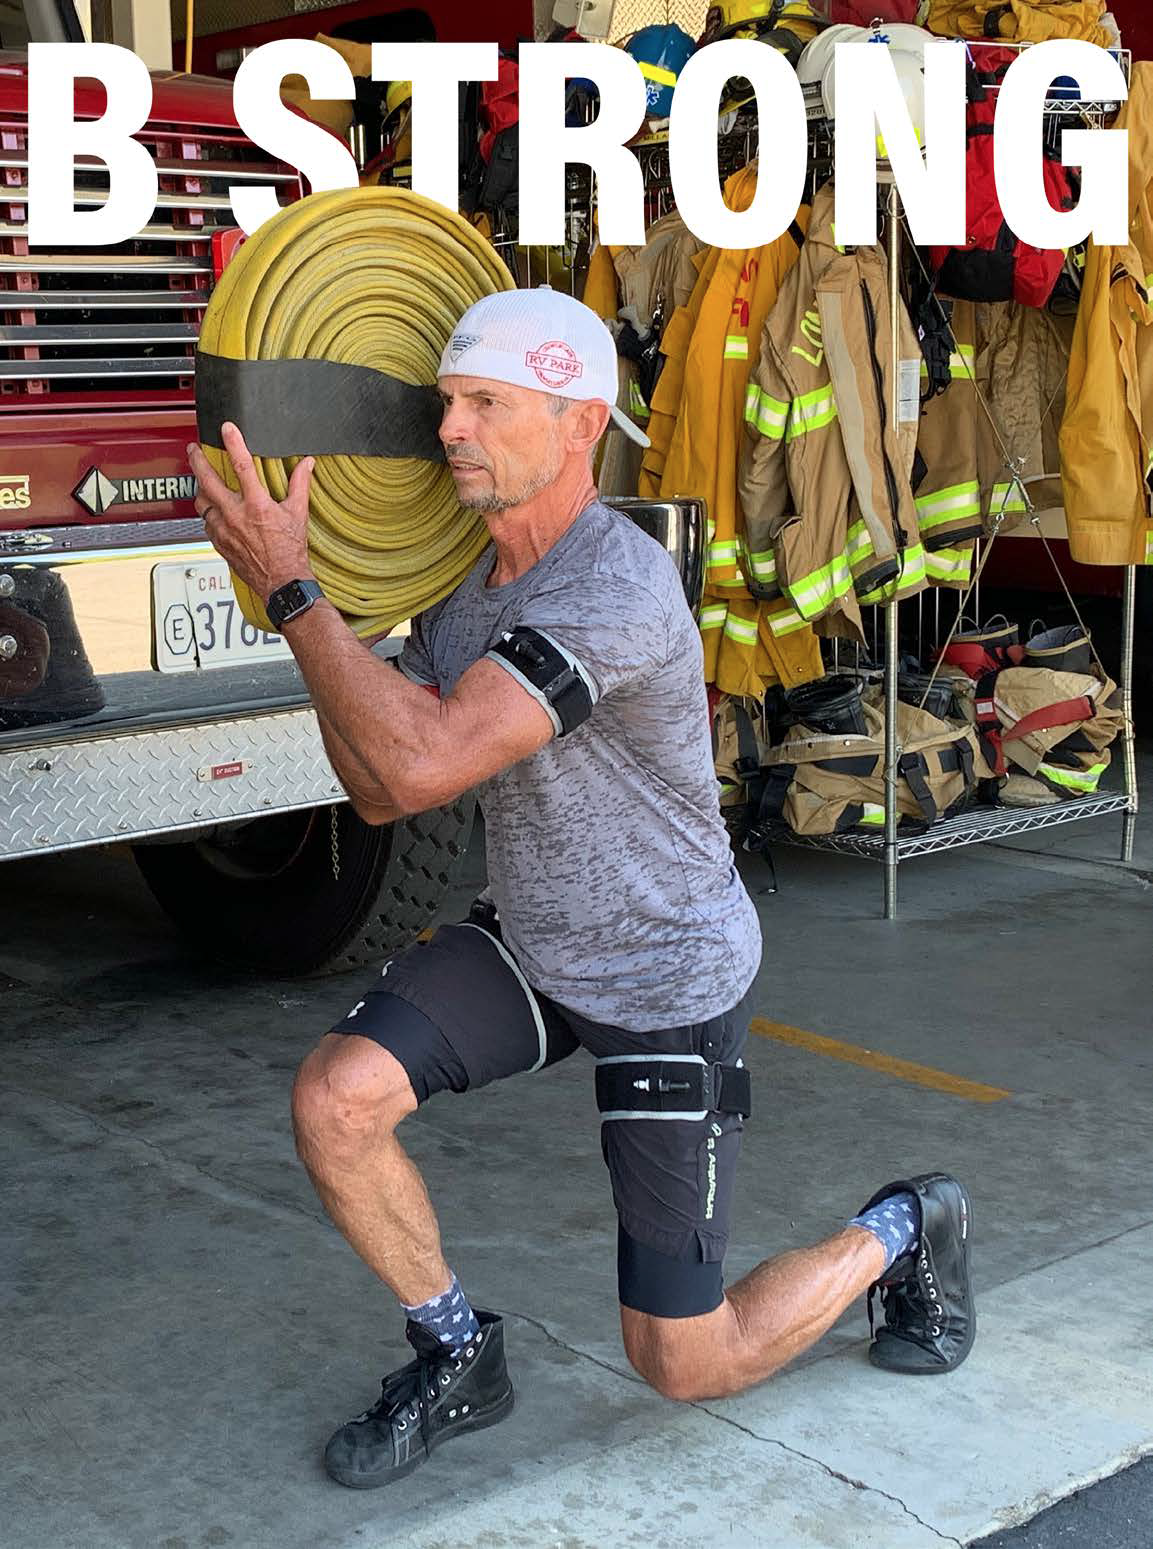 Firefighters use B Strong BFR to Avoid Injury and Quickly Improve Overall Fitness